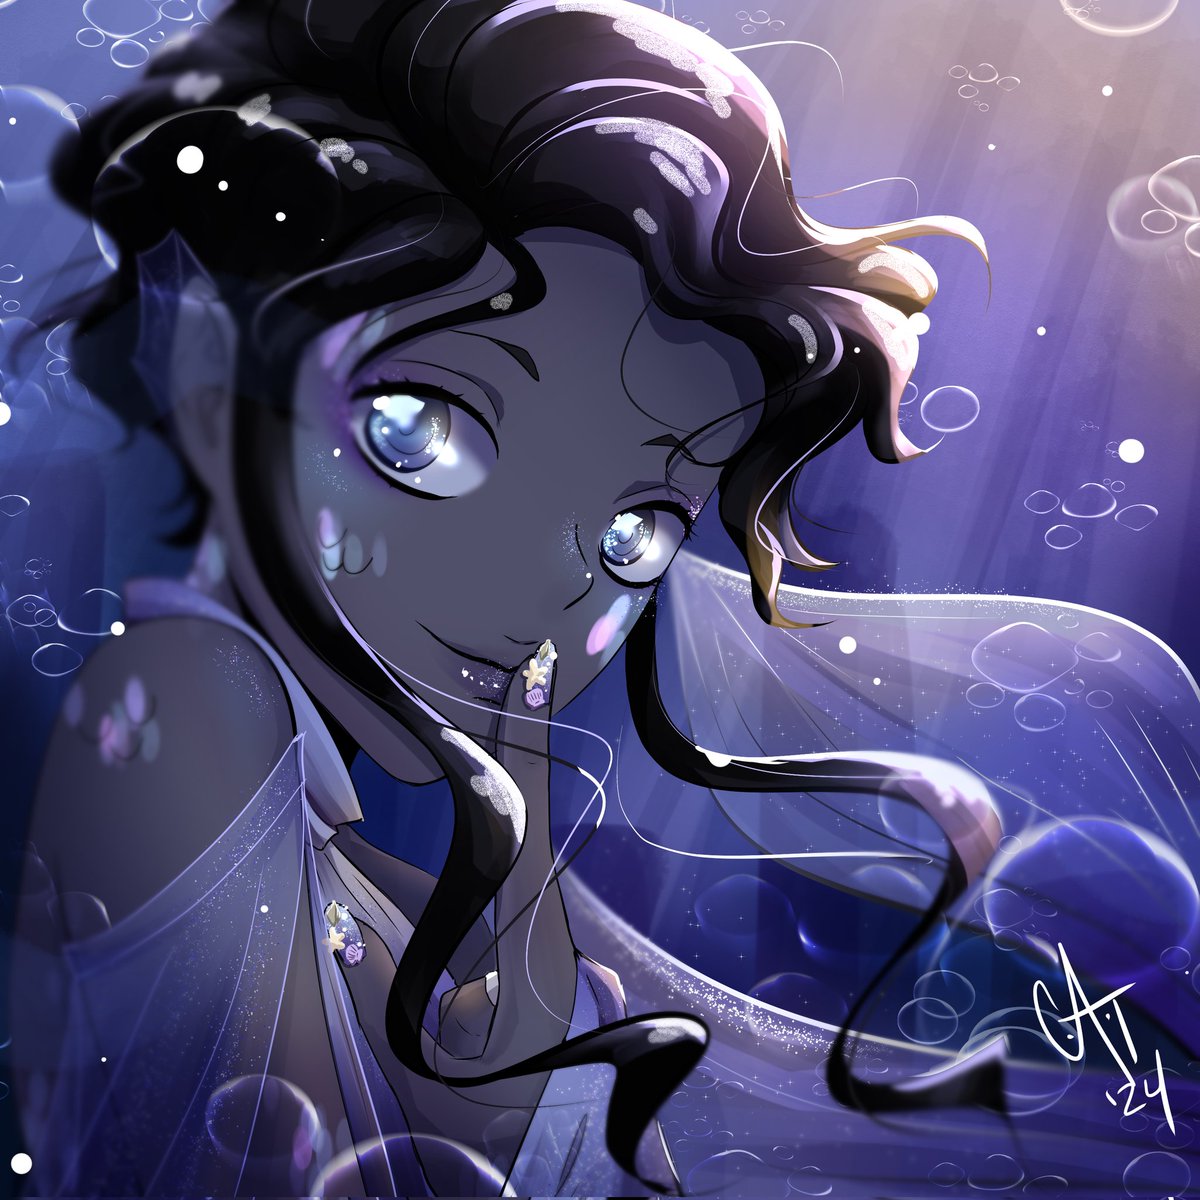 New sapphic OC from possible new romcom webcomic, 'I want to be a fish'. Realized I could introduce her during mermay😁 #iwanttobeafish #mermay2024 #webtooncanvas #tapascommunity